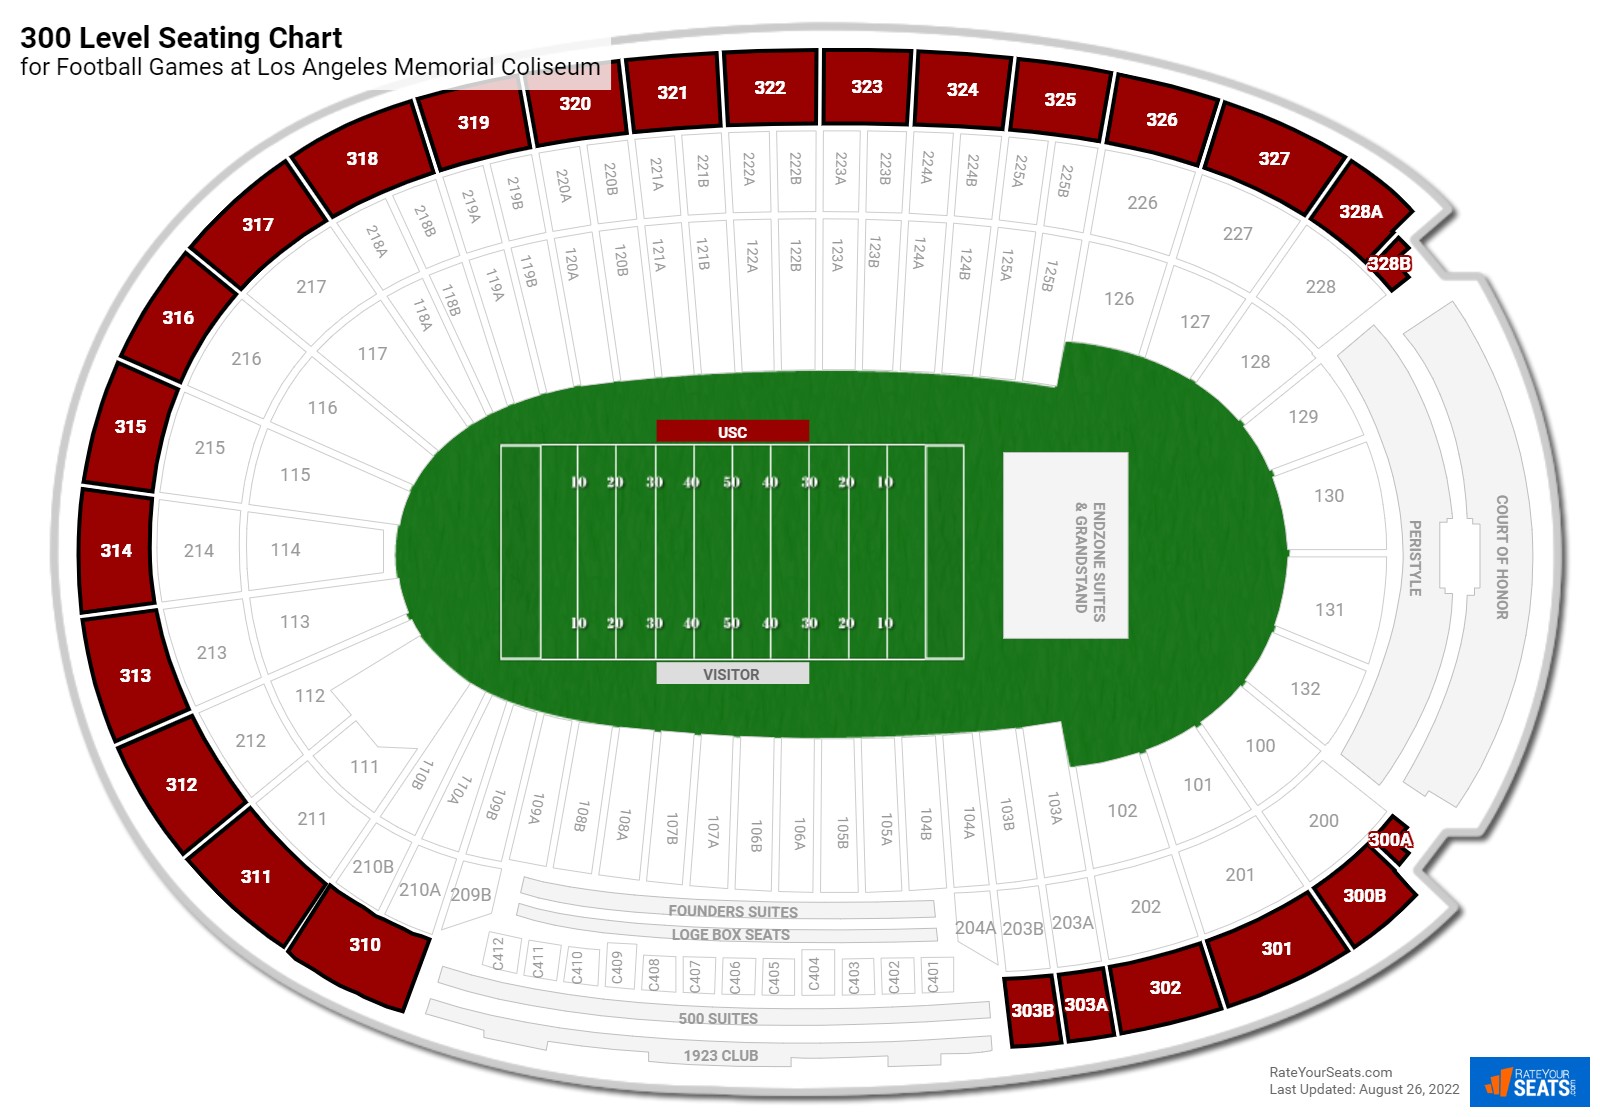 Football 300 Level Seating Chart at Los Angeles Memorial Coliseum